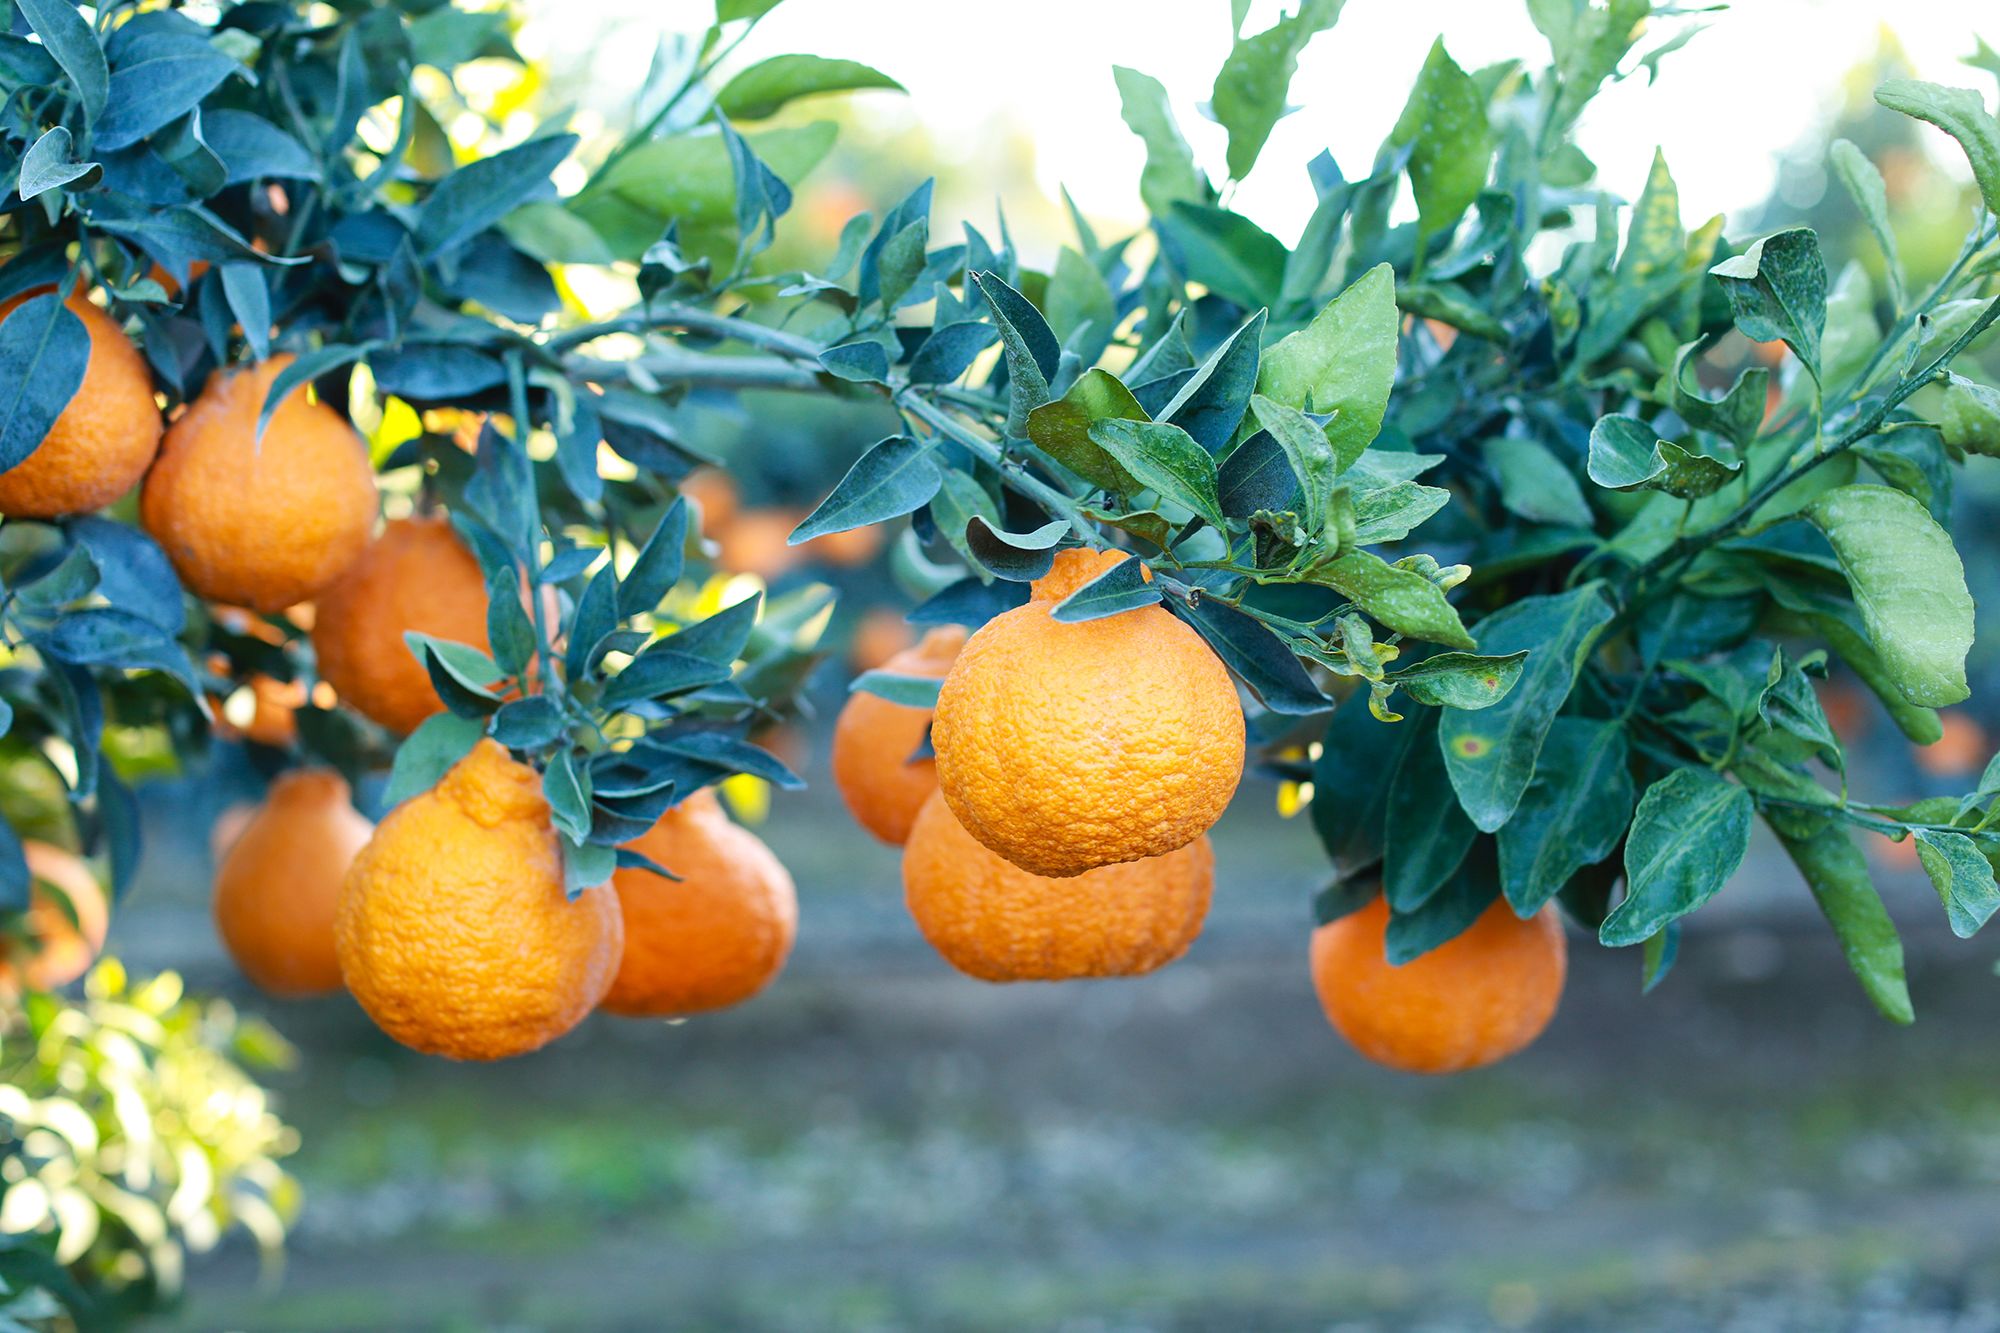 turns out sumo citrus are giant mandarins from Japan & they lived